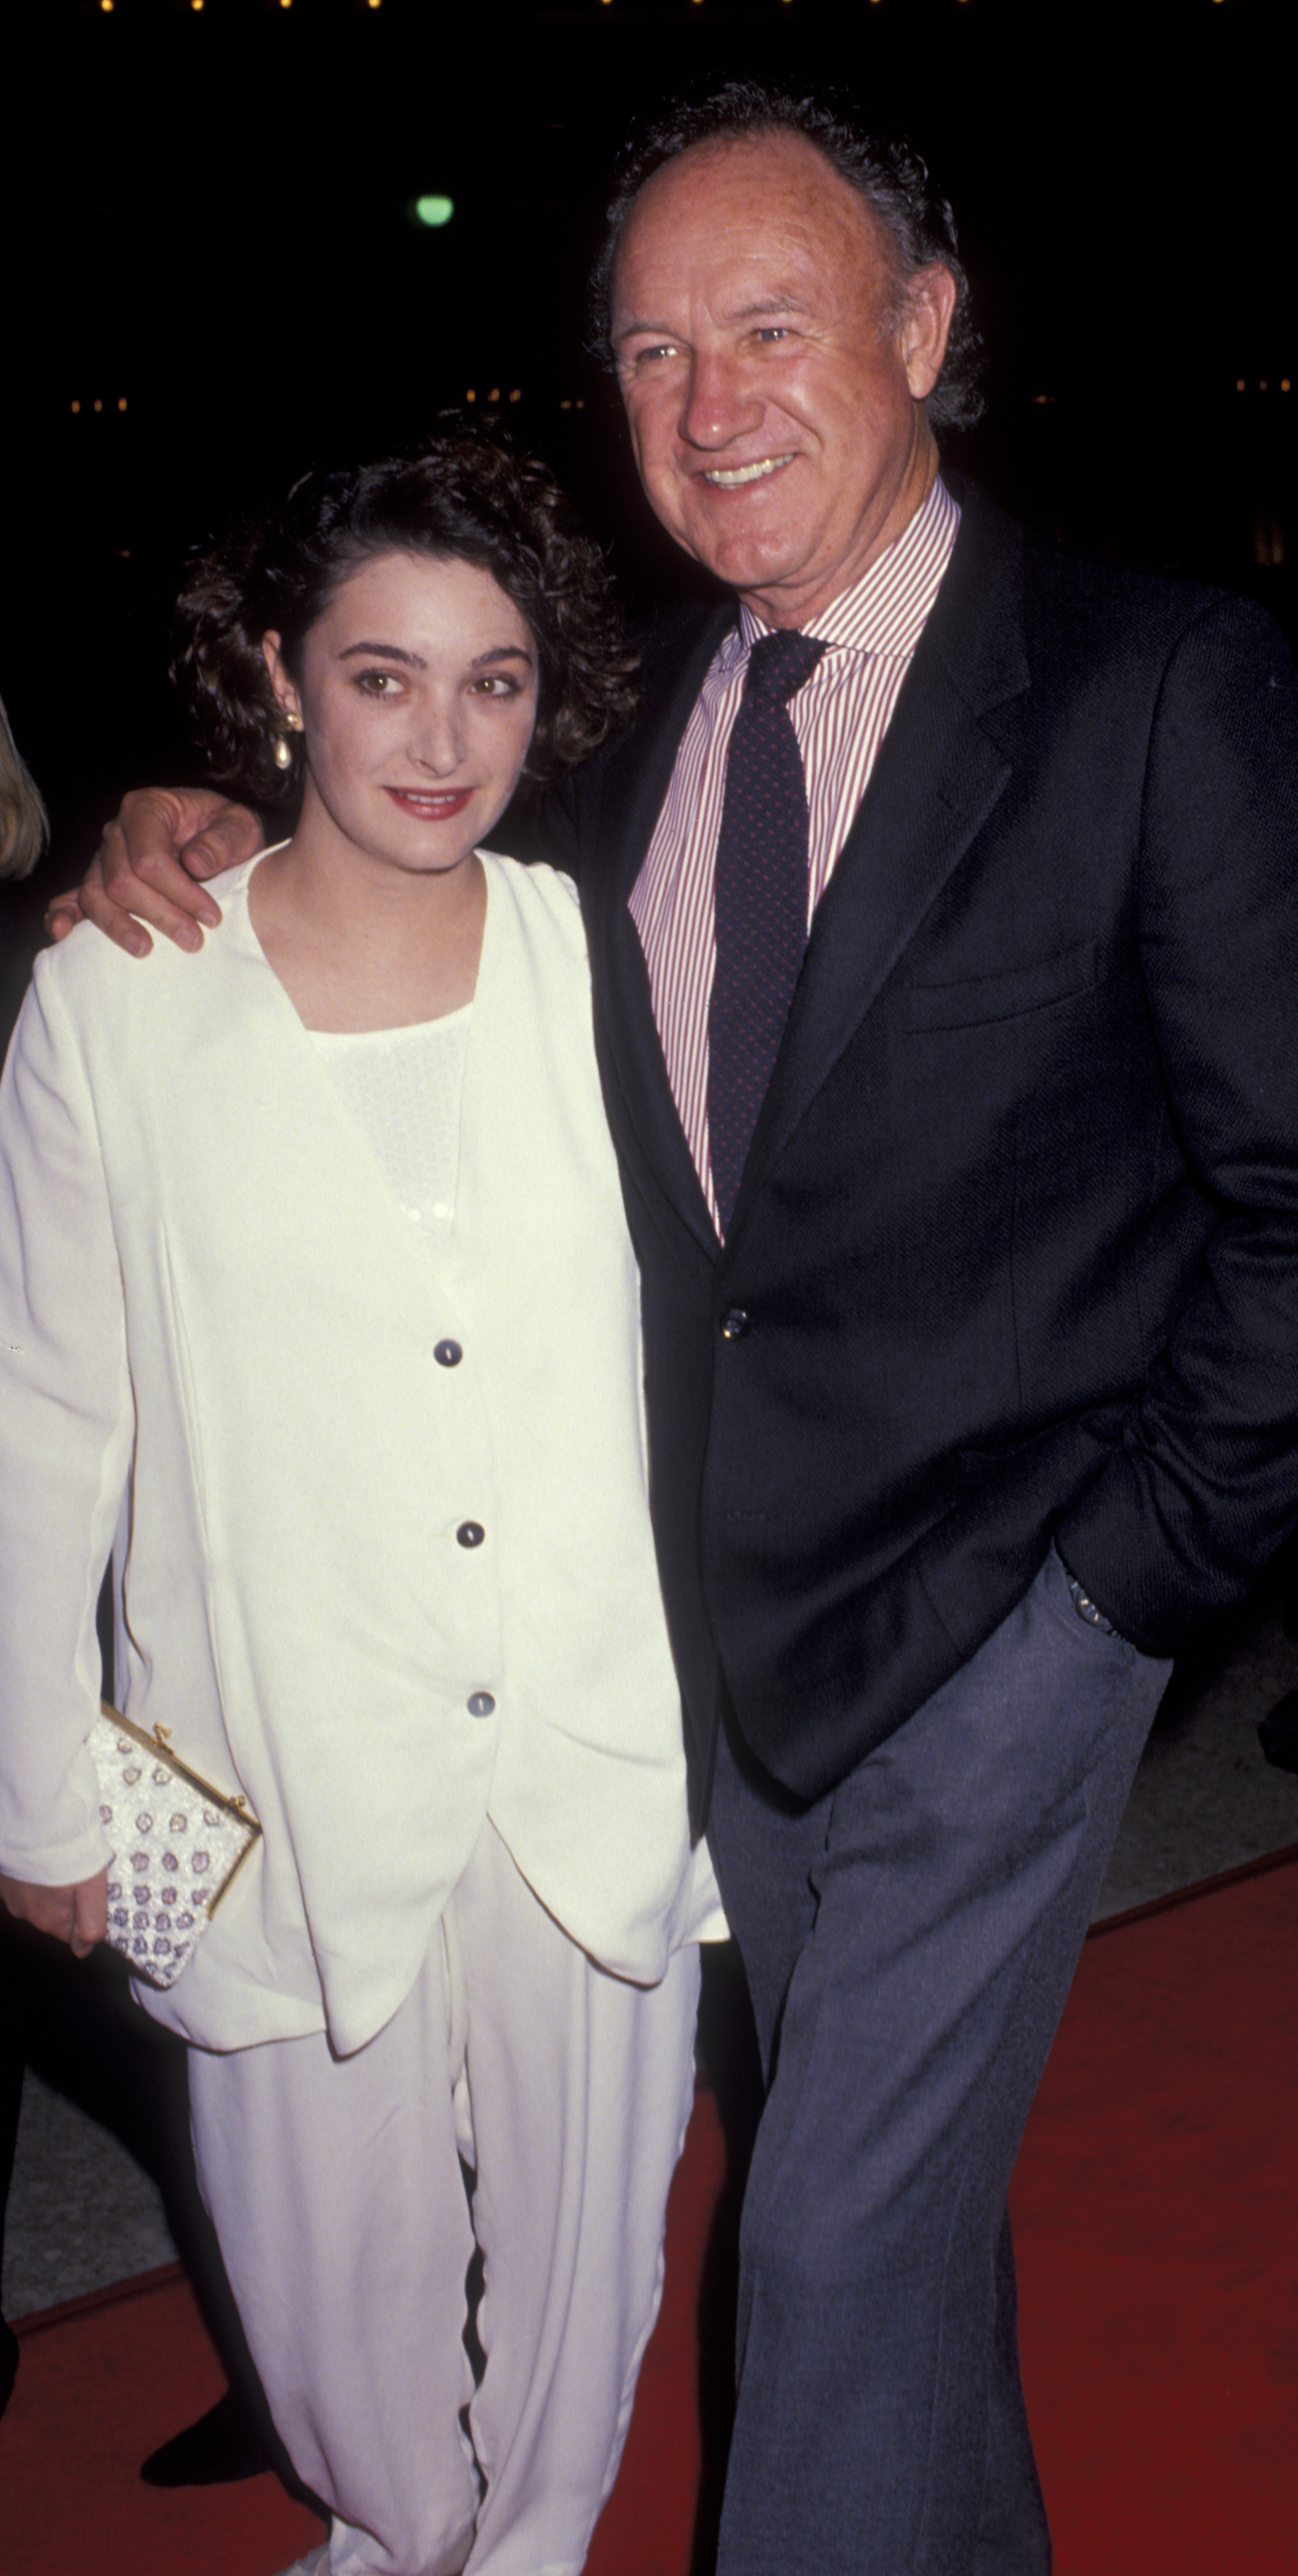 Actor Gene Hackman and daughter Leslie Hackman at the premiere of "Class Action" on March 13, 1991 at the Plitt Theater in Century City, California | Source: Getty Images